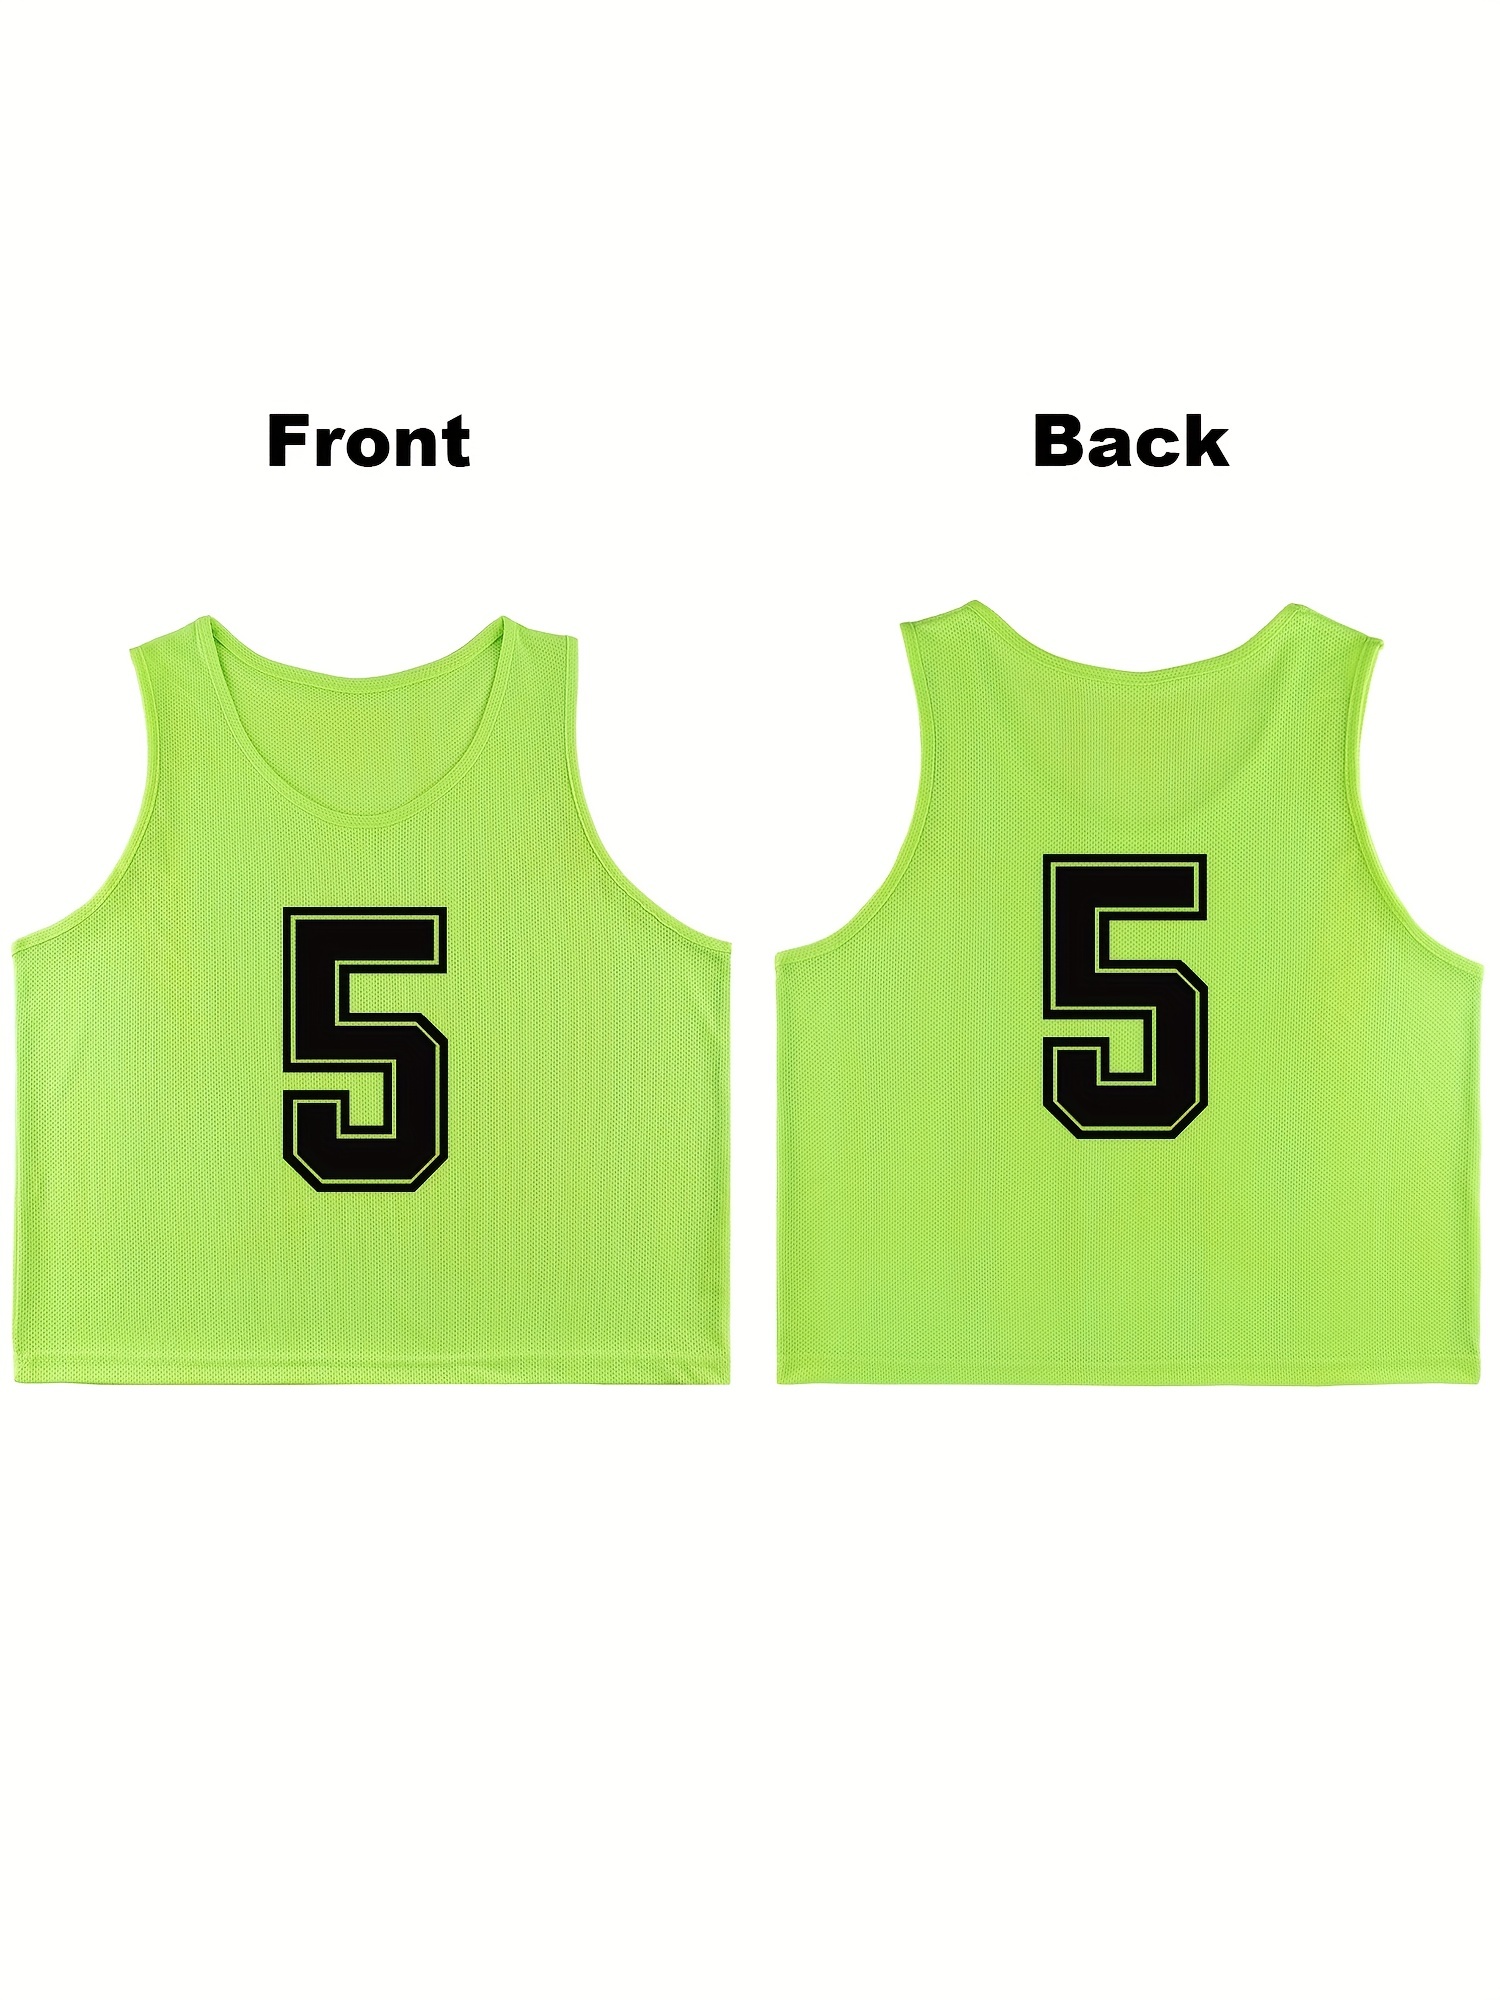 Athllete DURAMESH Set of 12- Scrimmage Vest/Pinnies/Team Practice Jerseys  with Free Carry Bag. Sizes for Children, Youth, Adult and Adult XXL (Red,  Medium) 